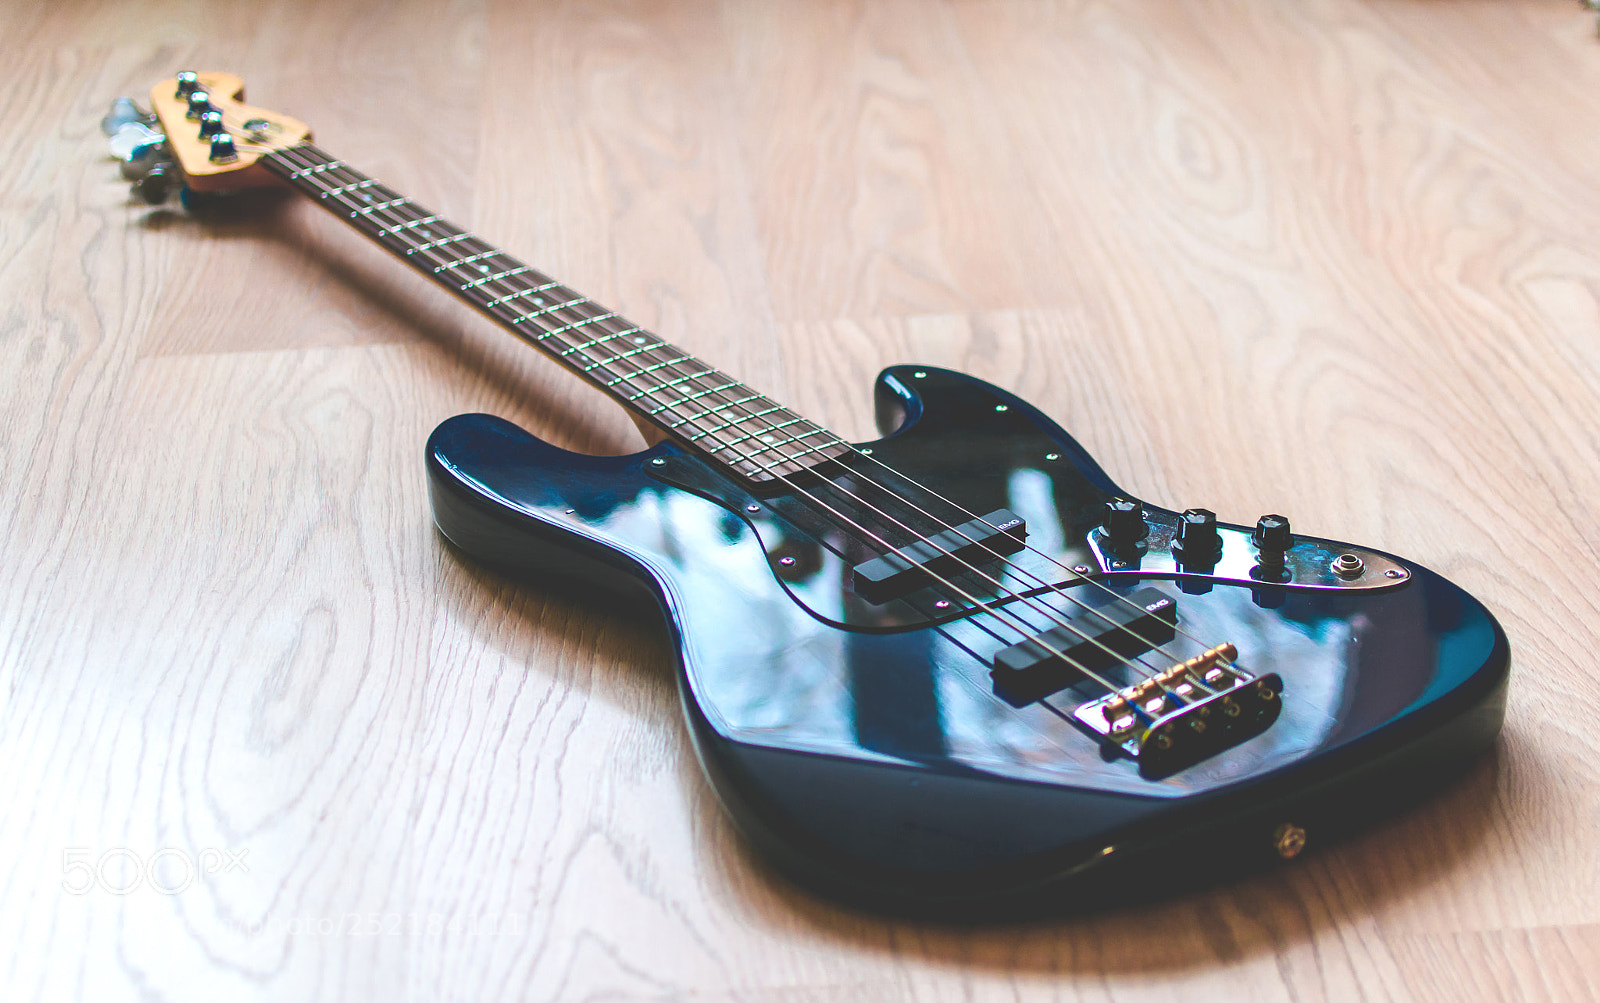 Nikon D3100 sample photo. Jazz bass is for photography